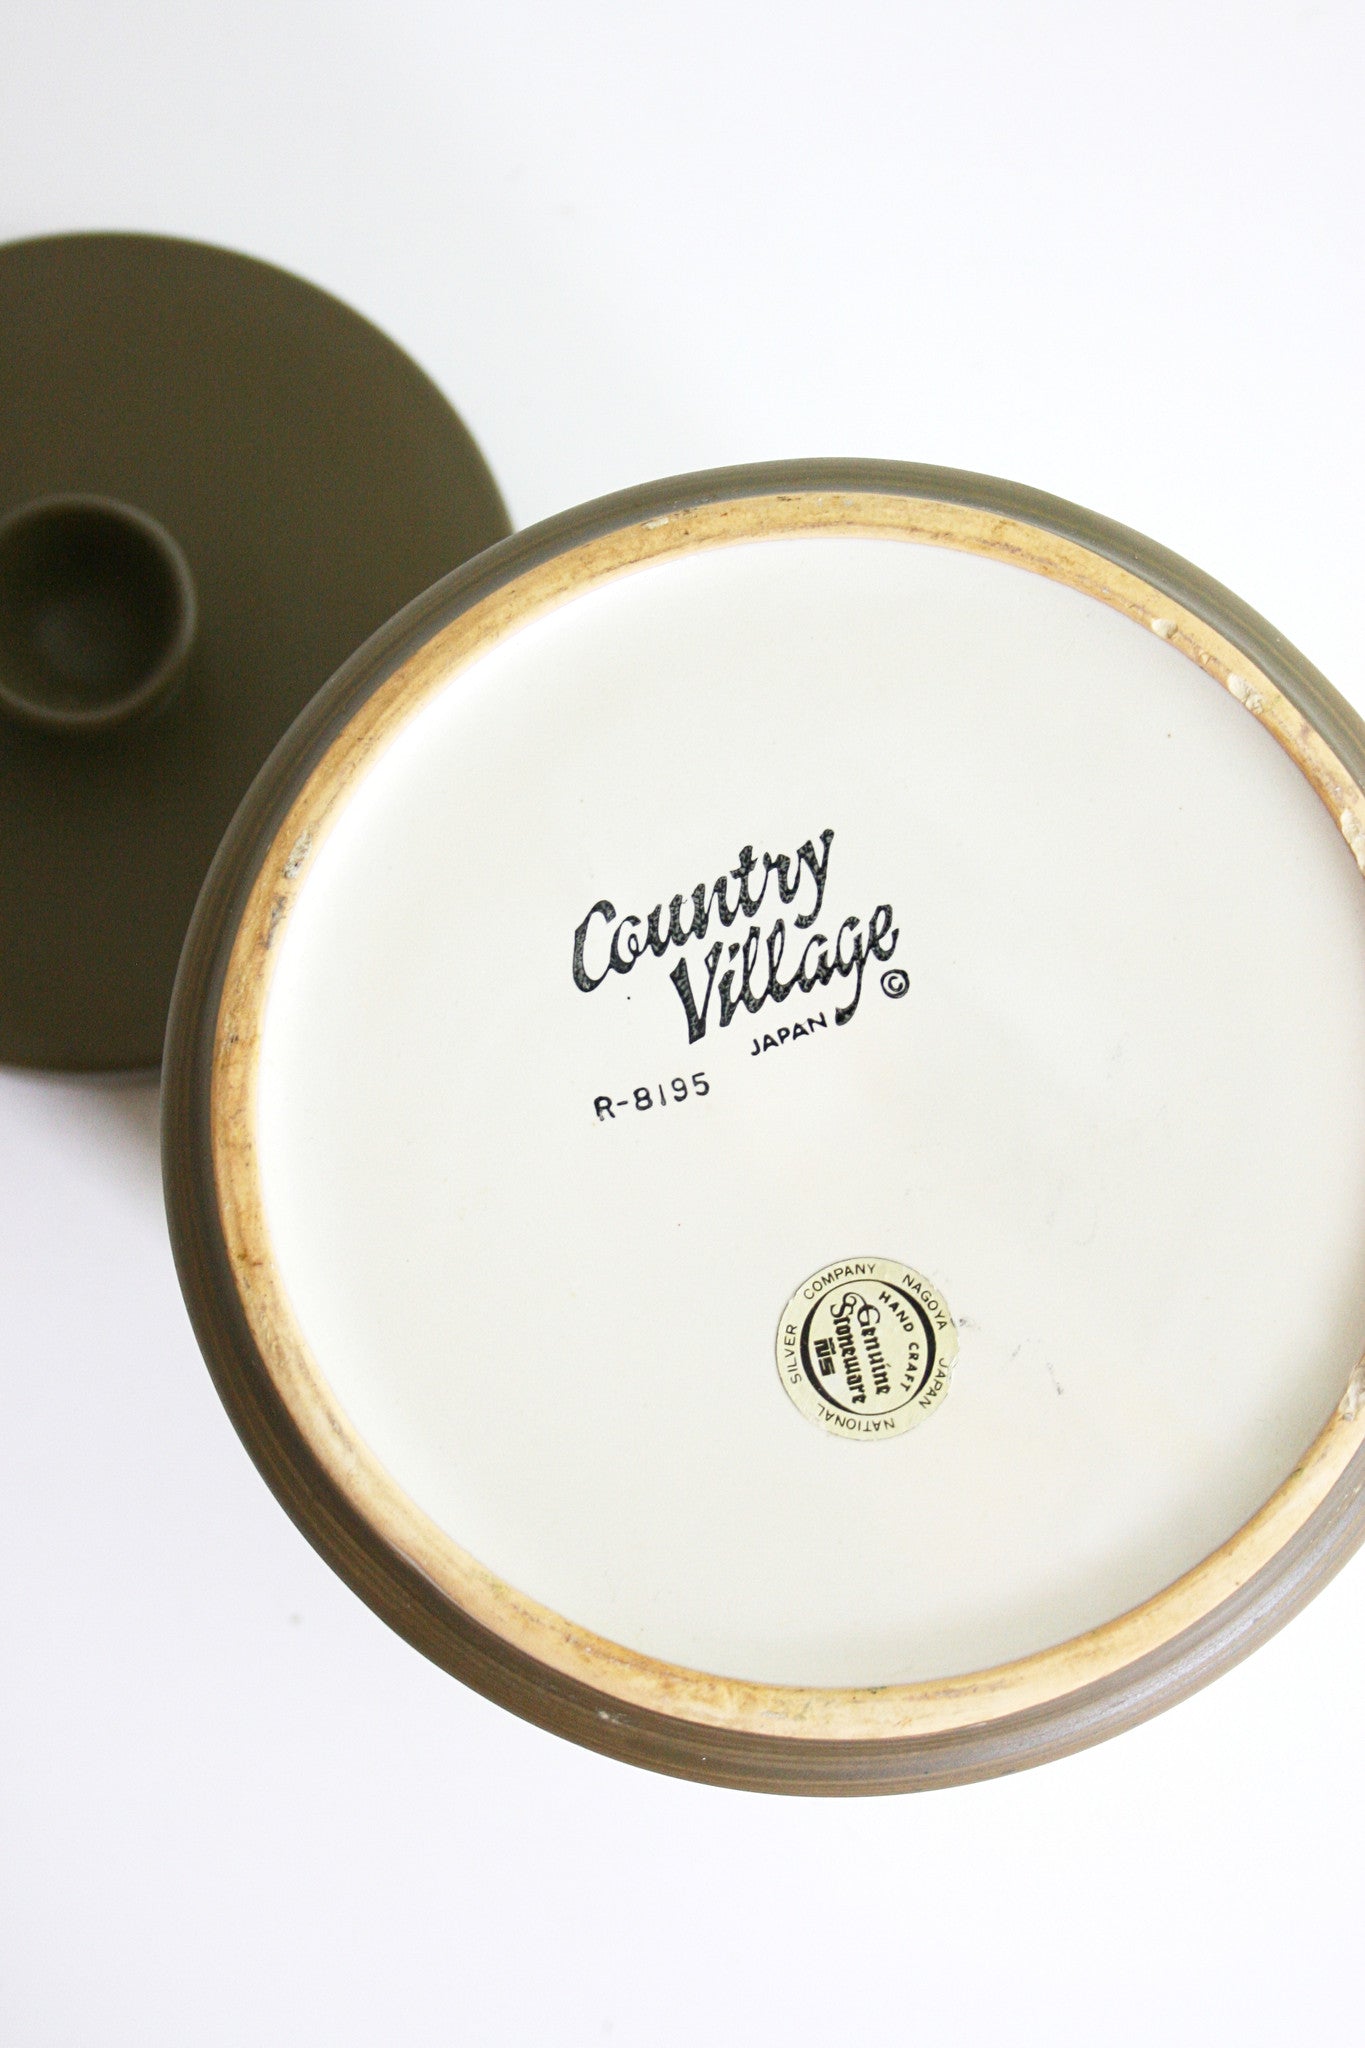 SOLD - Vintage Country Village Stoneware Canister Set / Vintage Houses Ceramic Canisters From Japan